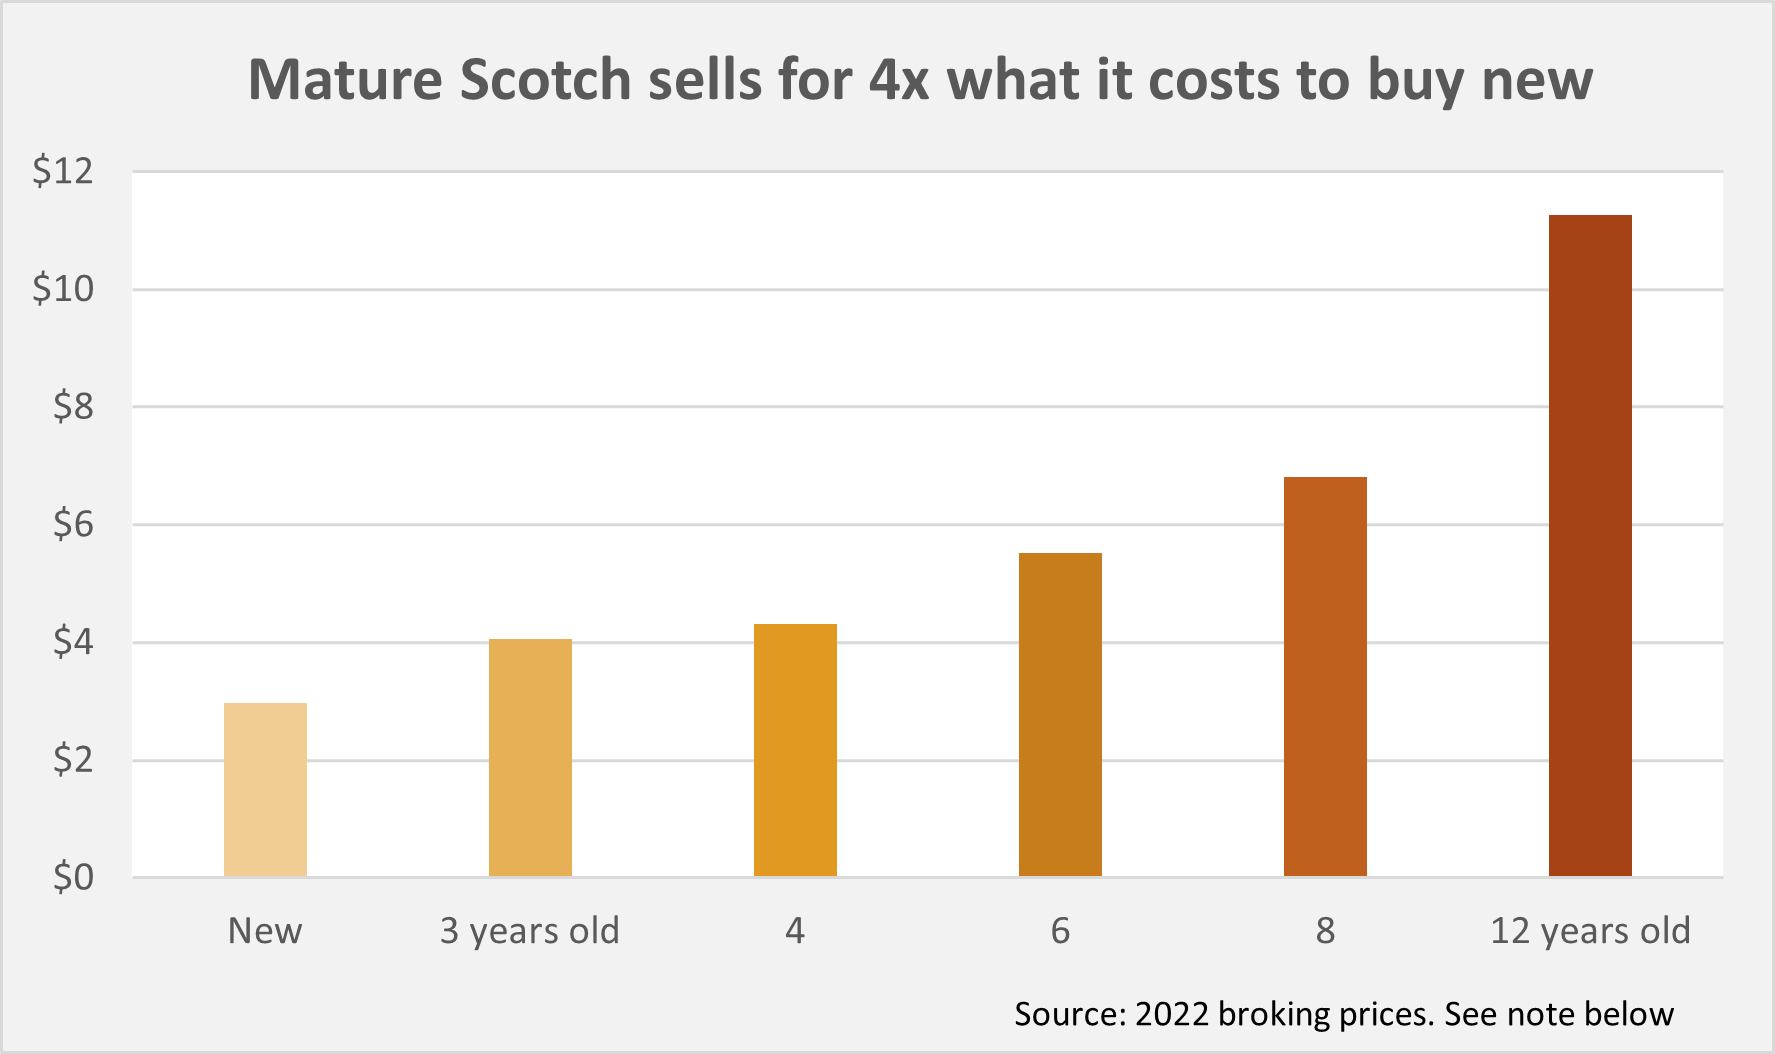 Maturing Scotch sells for 4x what it cost to buy new